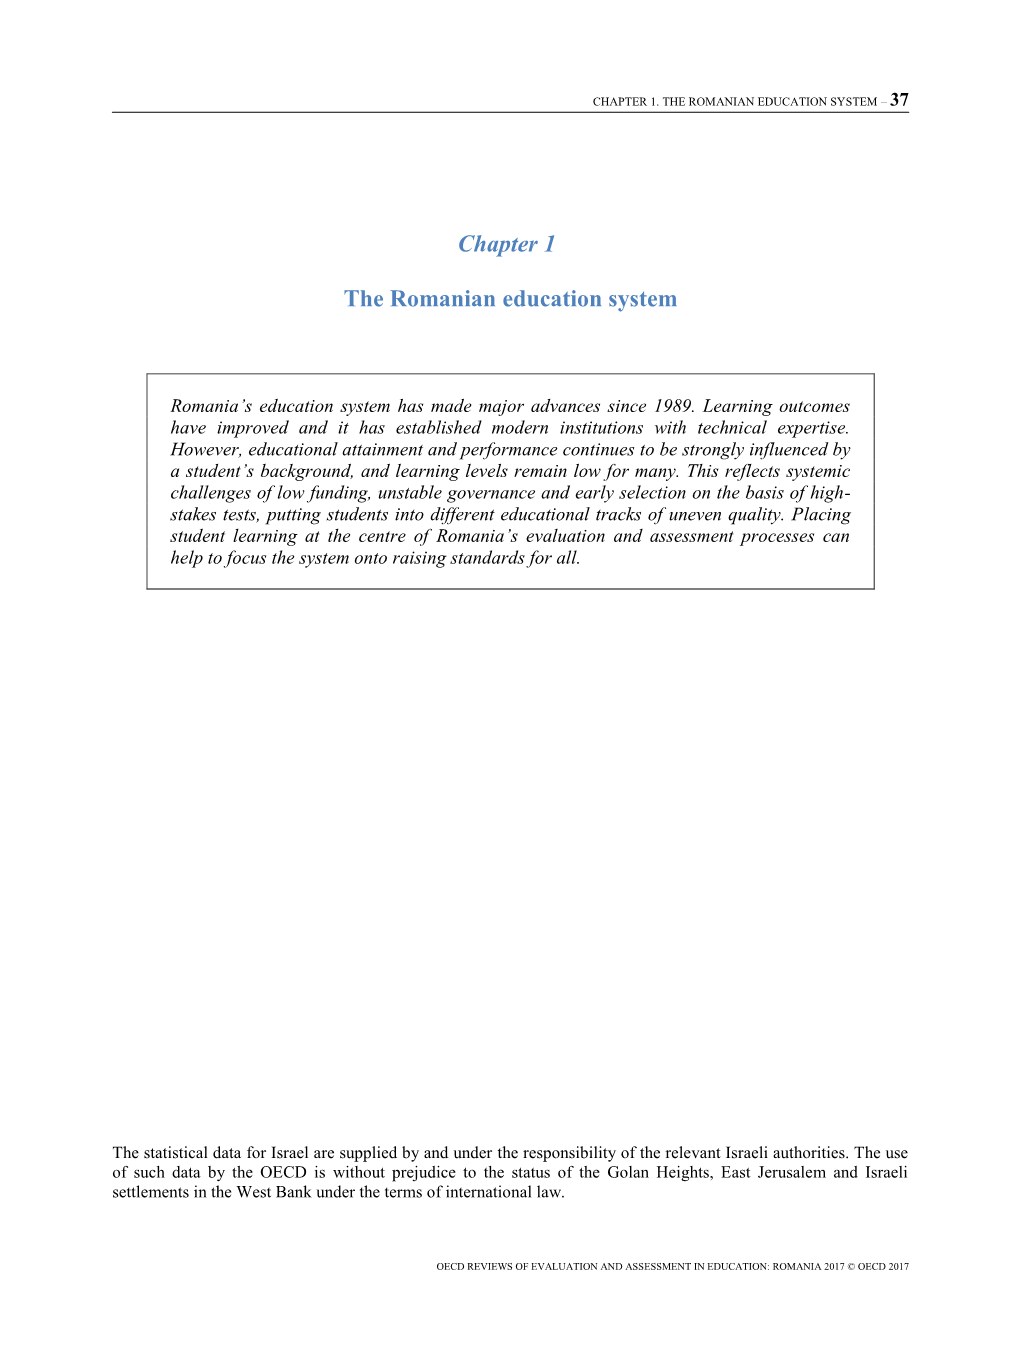 Chapter 11 the Romanian Education System